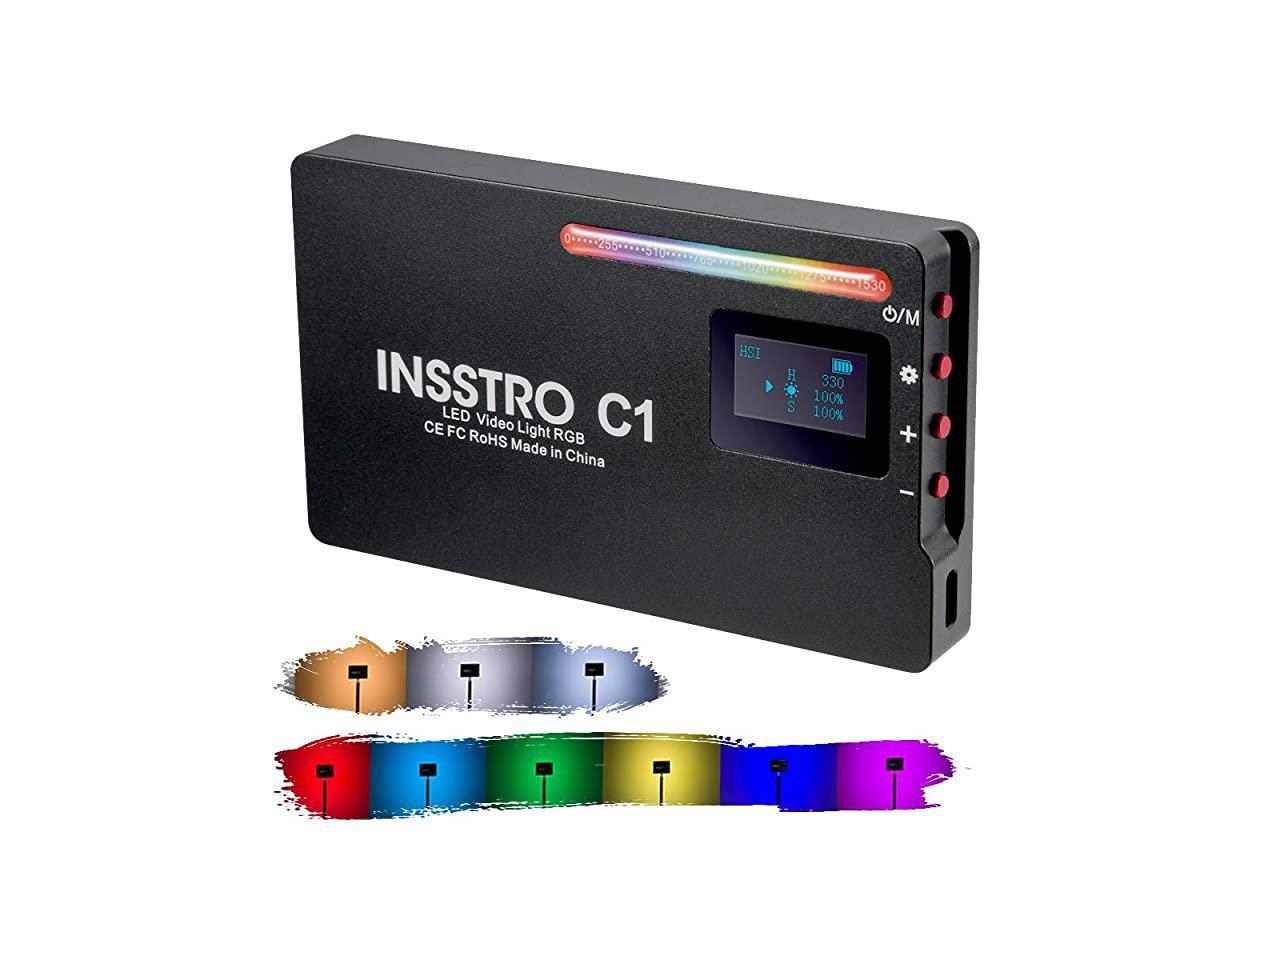 Full Color RGB Light for Camera Camcorder INSSTRO C1 RGB LED Video Light 10 Scene Simulations with Premium Aluminum Alloy Shell Rechargeable Pocket Size Video Light with 2500k-8500k Color Range